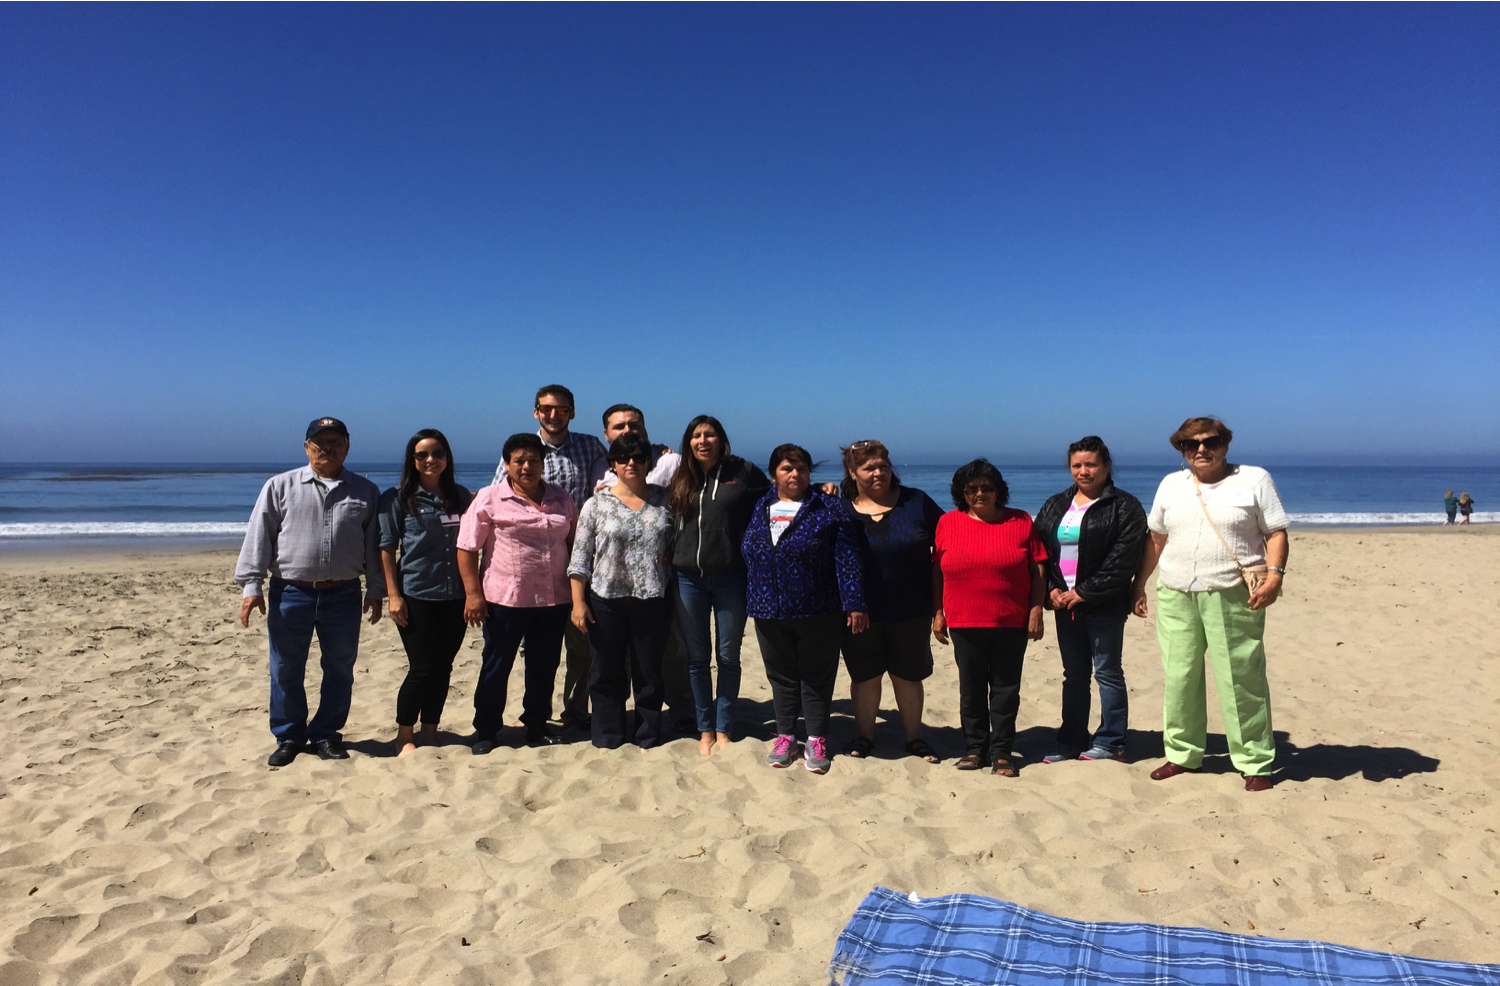 Participants in diabetes group Shared Medical Appointment offered by the Santa Cruz Community Health Centers (SCCHC) and UCSF.